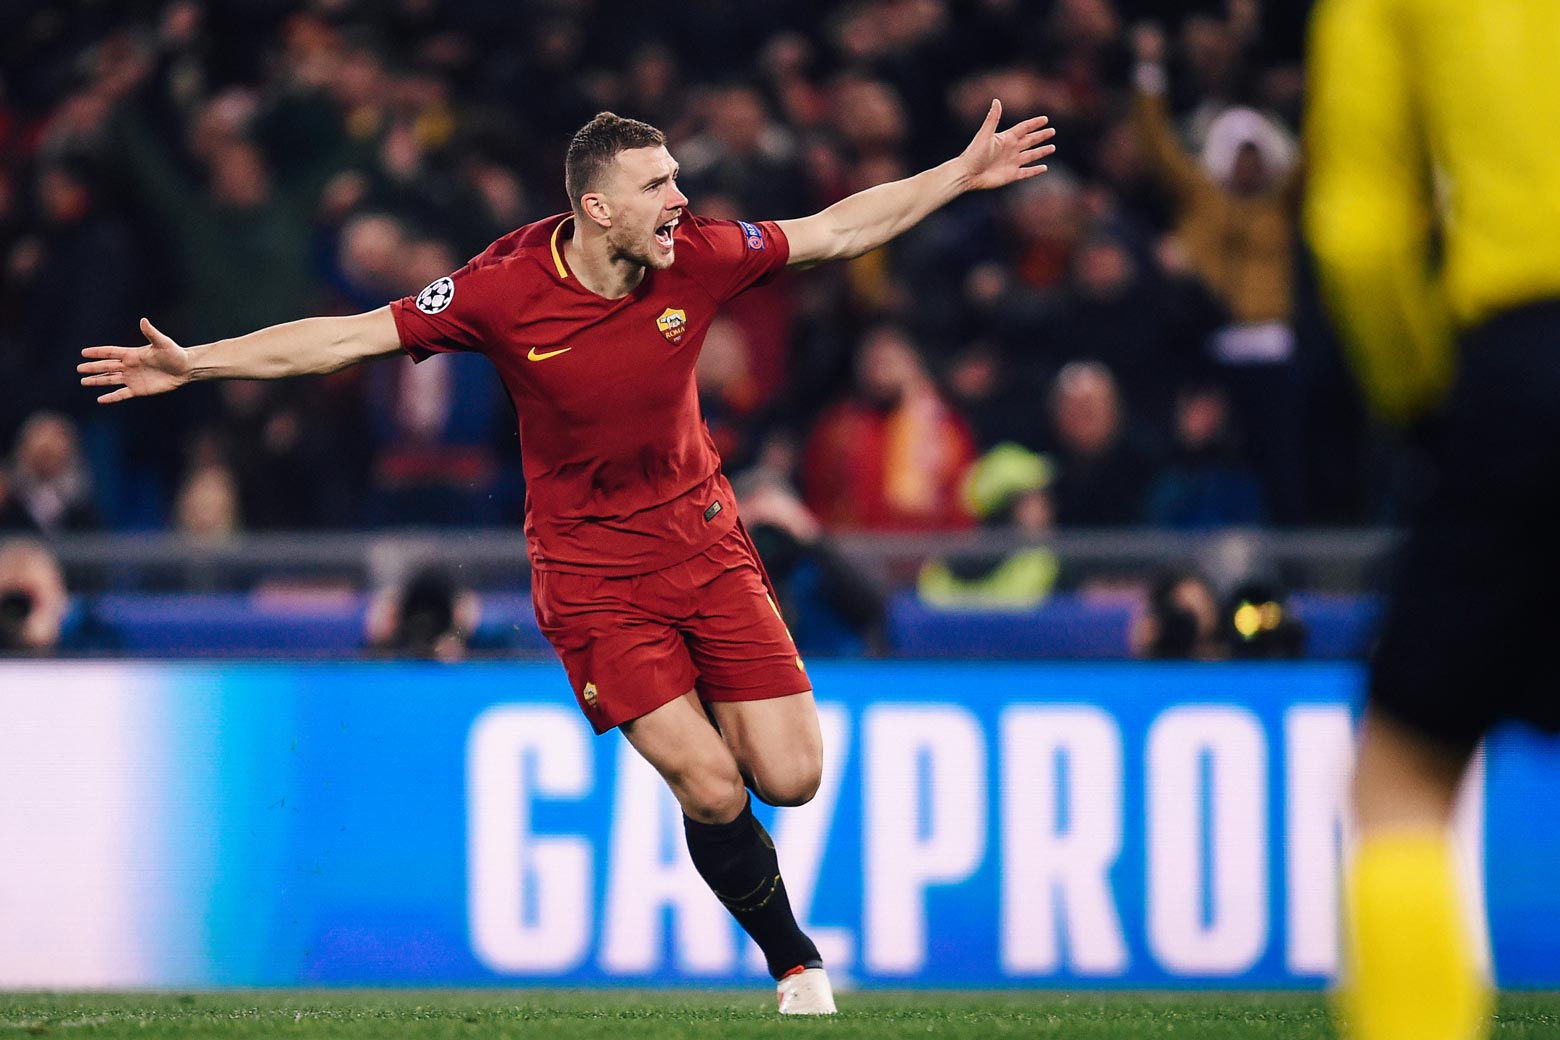 Roma’s Bosnian striker Edin Džeko celebrates after scoring during the UEFA Champions League round of 16 second-leg football match against Shakhtar Donetsk on Tuesday at the Olympic Stadium in Rome.